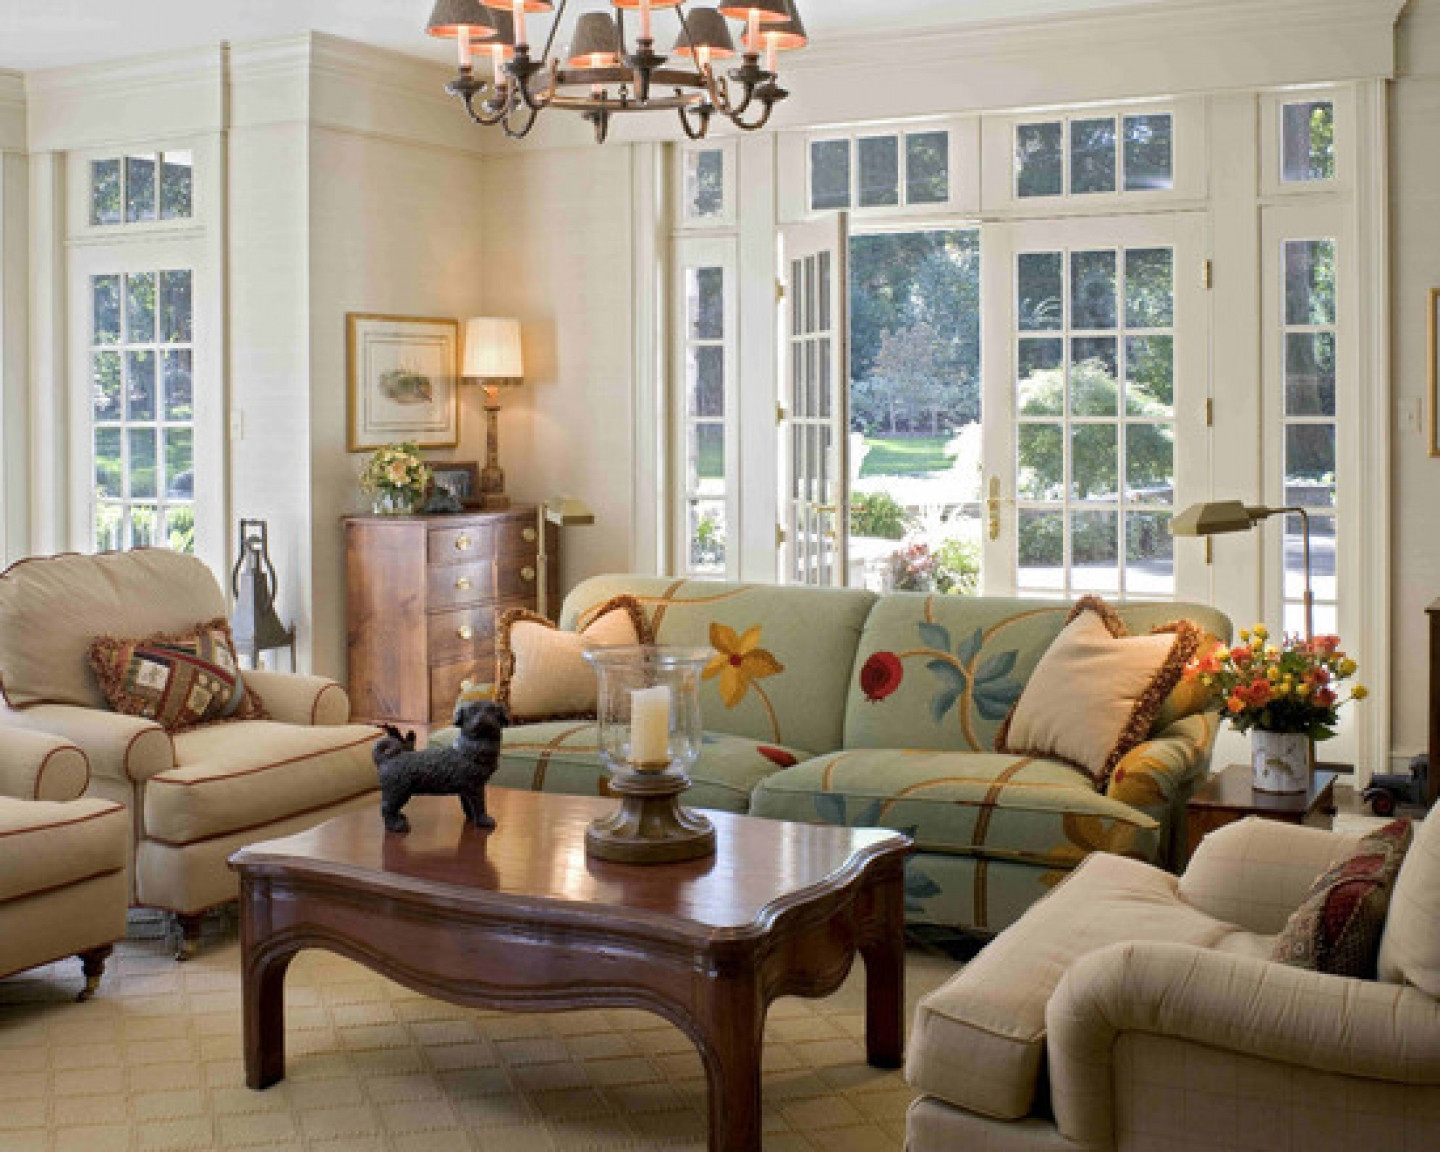 French Country Living Room Ideas
 Chic French Country Inspired Home Real fort and